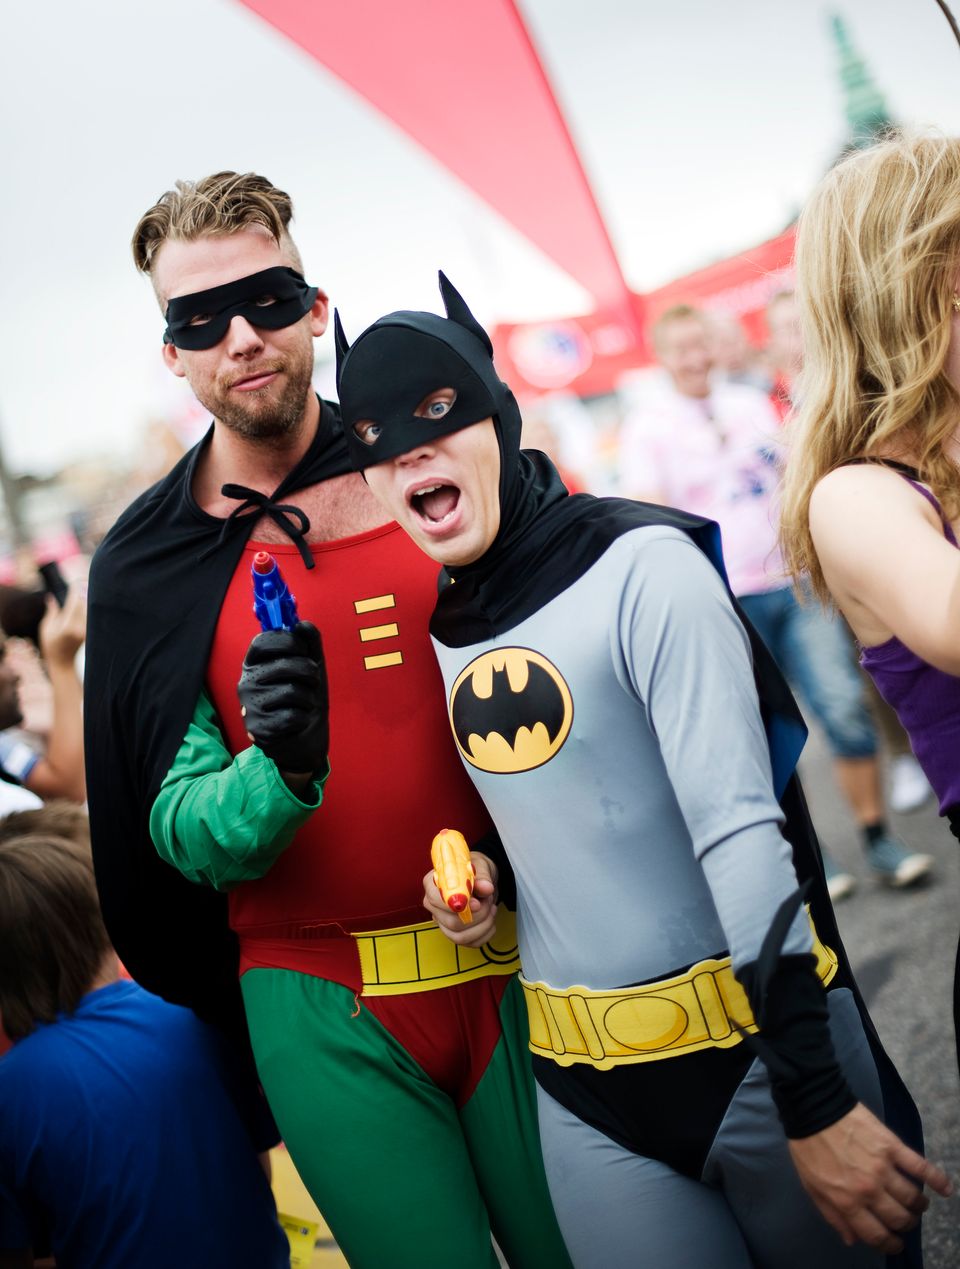 12 Of The Best Halloween Costumes For Gay Male Couples | HuffPost Voices